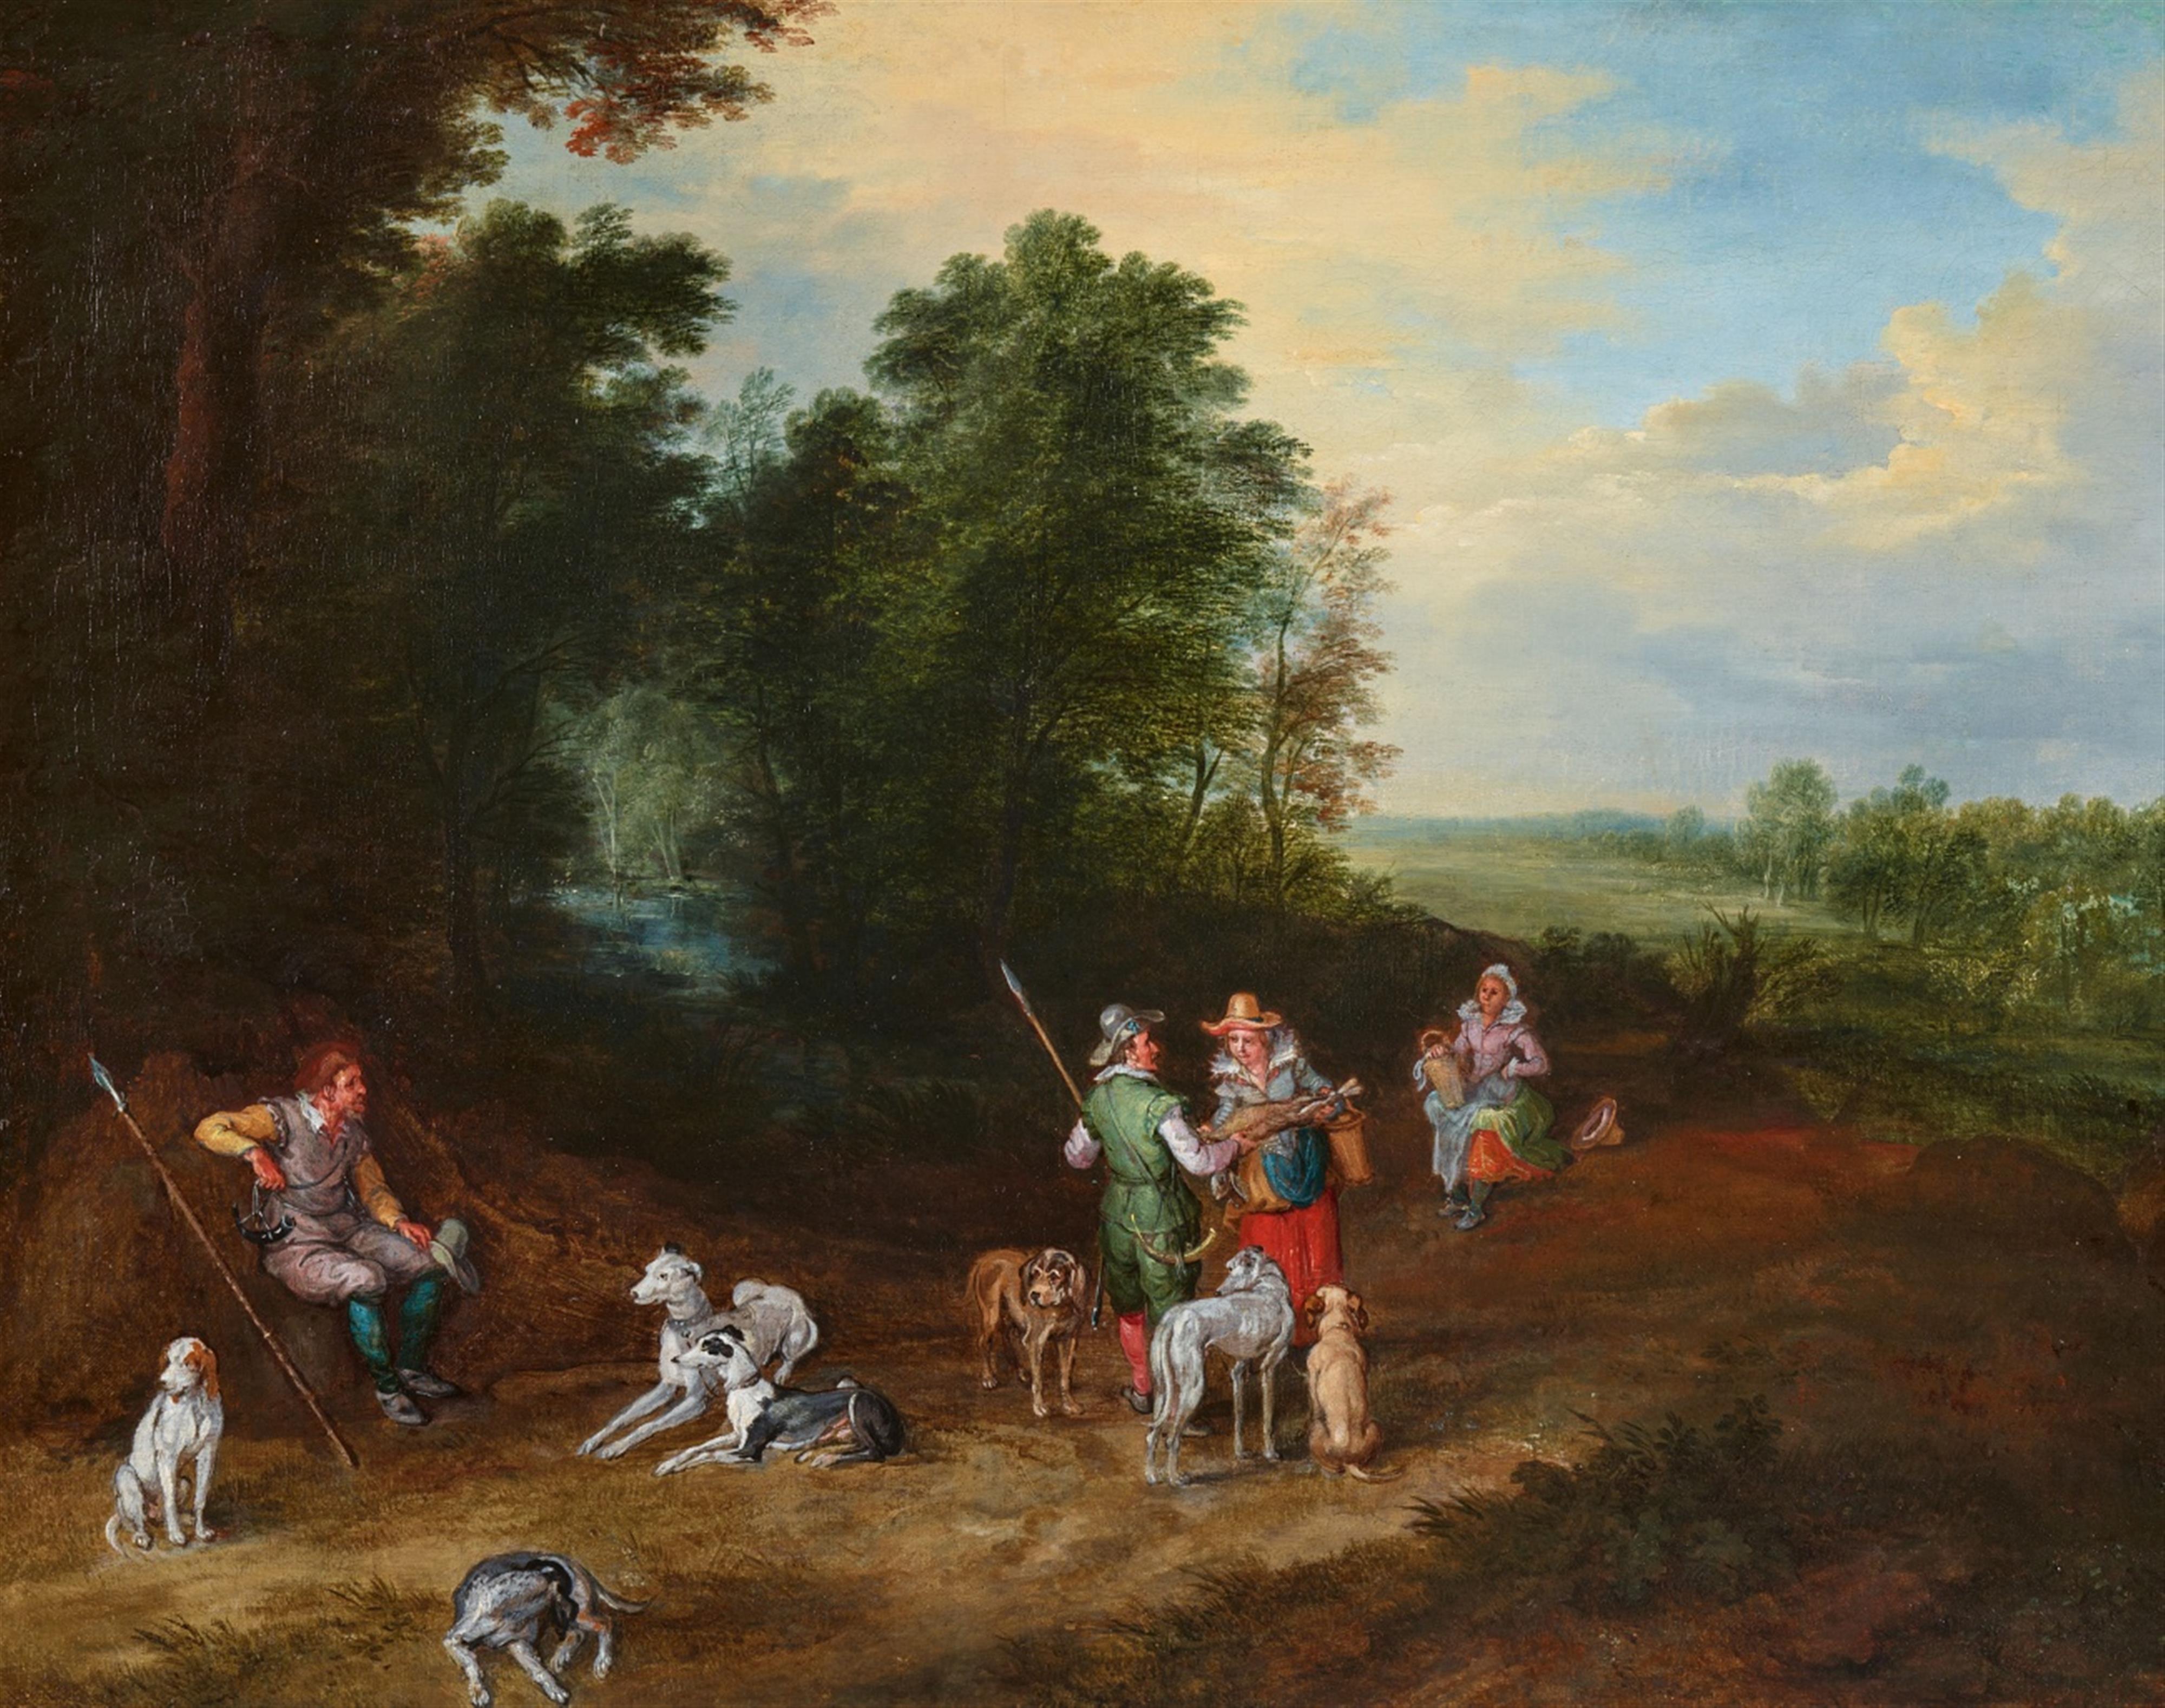 Jan Brueghel the Younger - Hunting Party in a Wooded Landscape - image-1